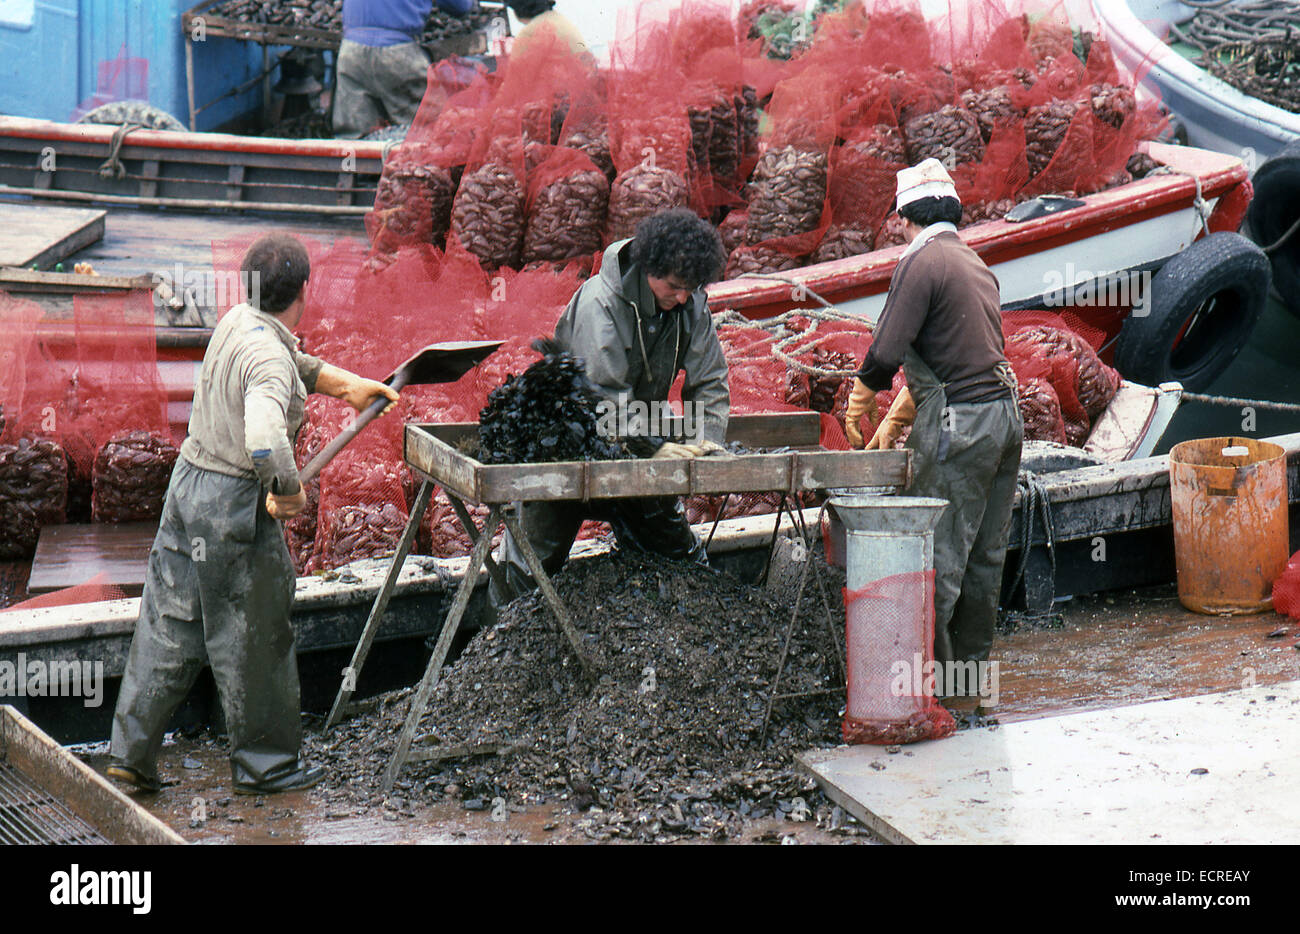 EL GROVE, PONTEVEDRA, GALICIA, SPAIN - JULY, 1983: The crew of a fishing boat clean a mussel and put them in bags for sale on Ju Stock Photo